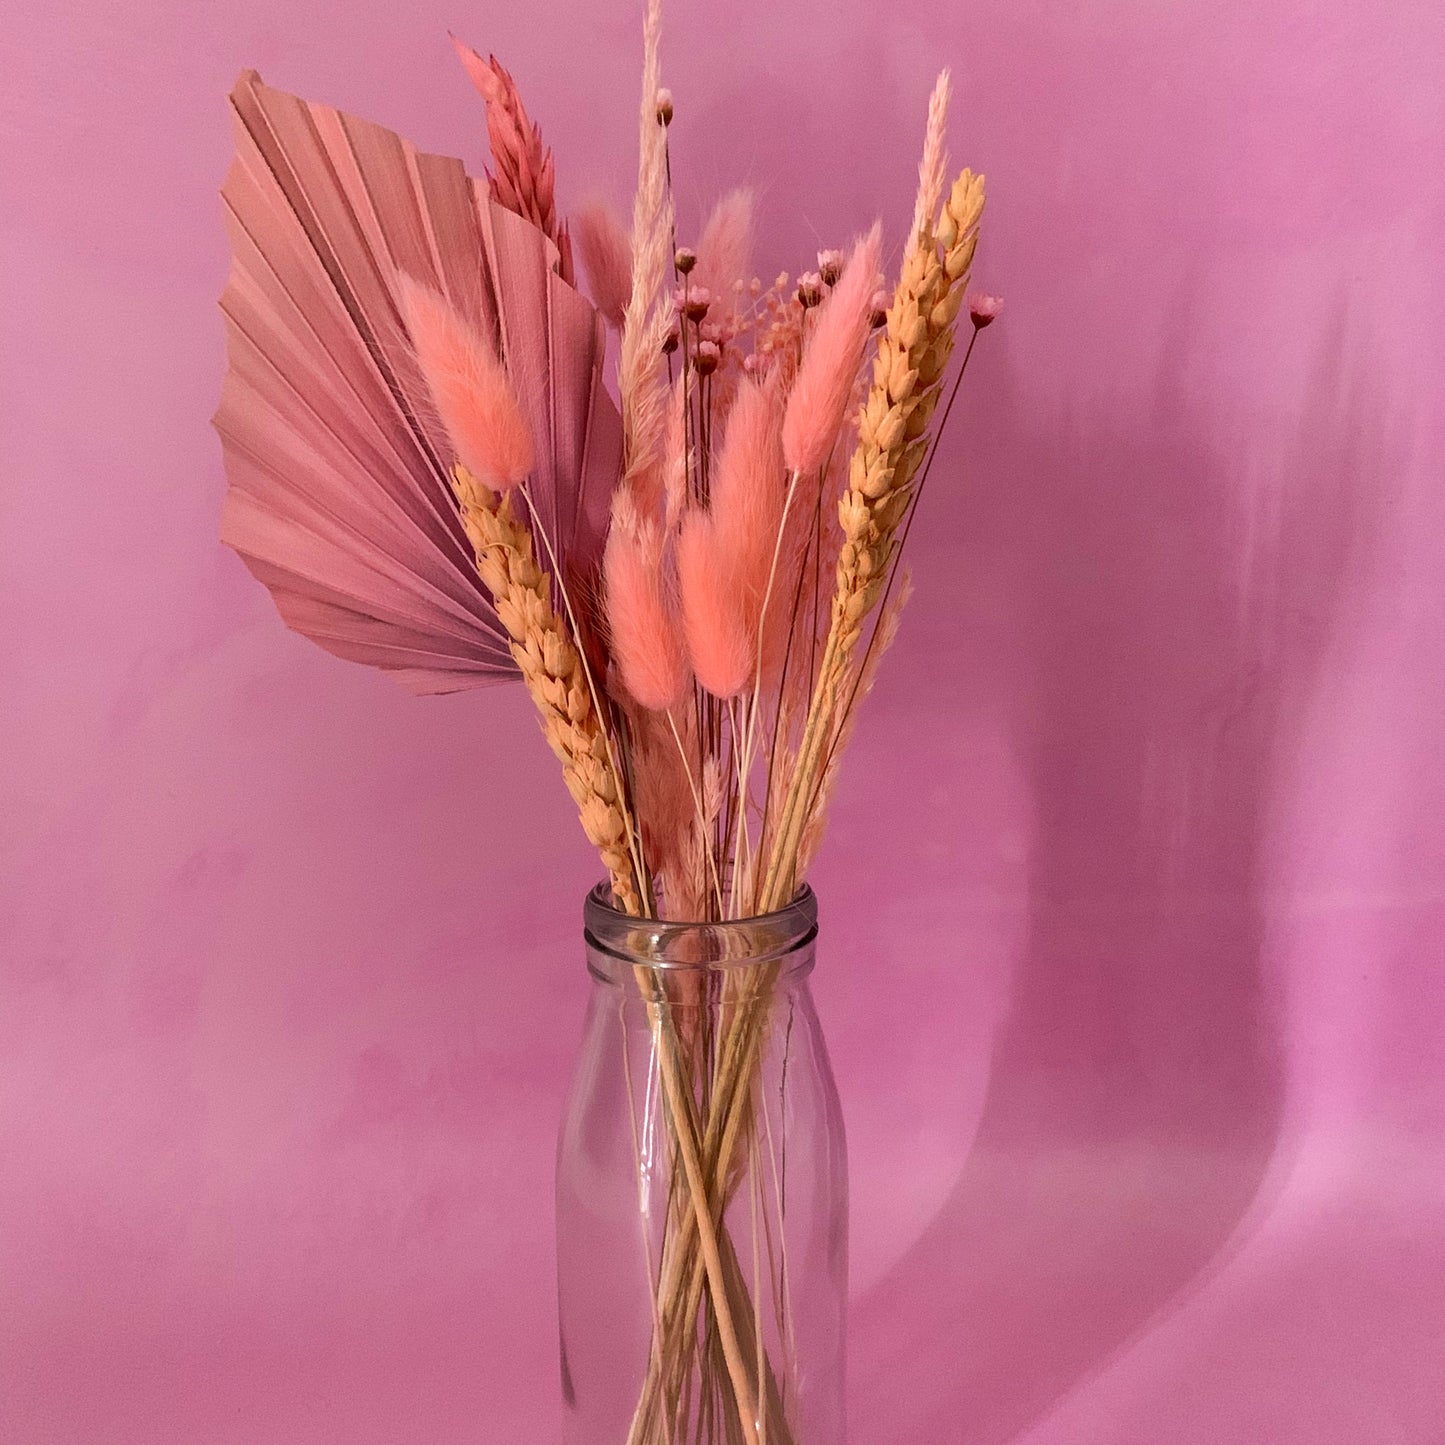 Pink and peach dried letterbox flowers - arrange your own